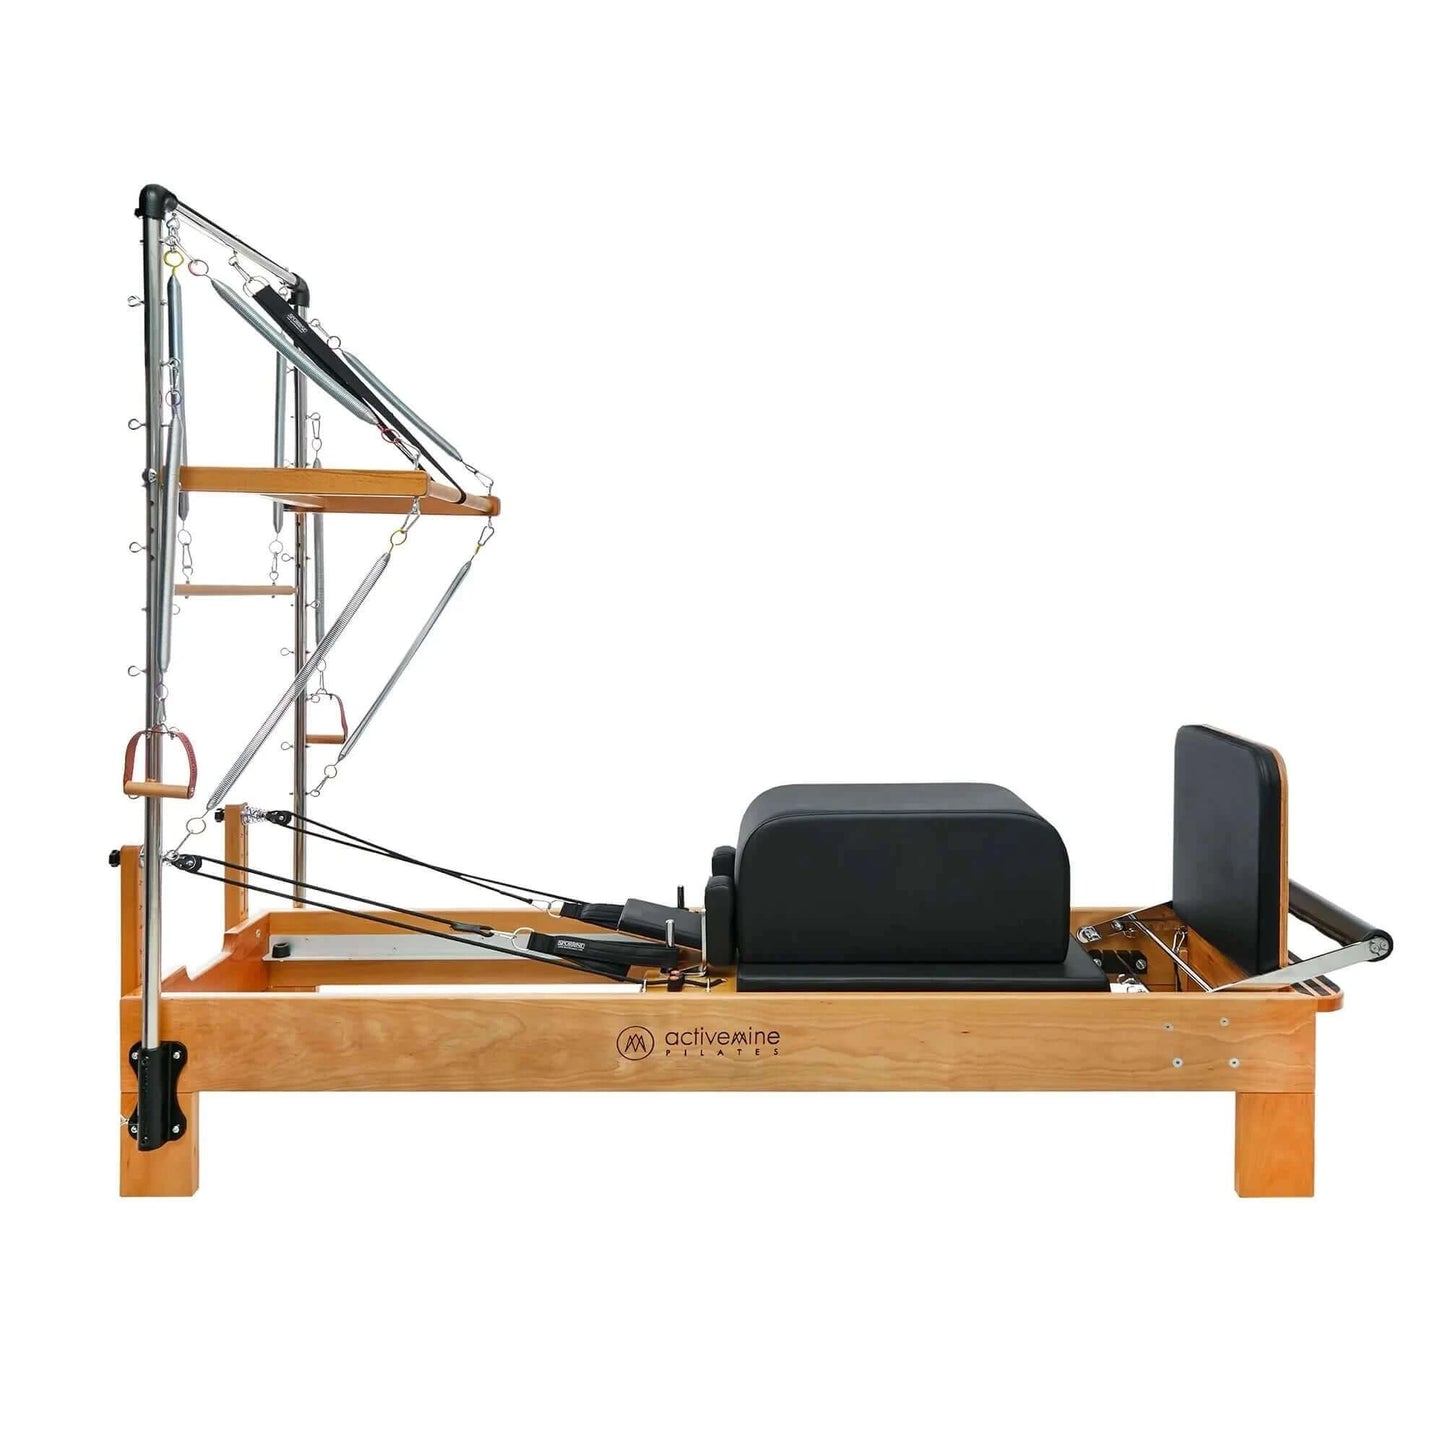  Activemine Tower Reformer Machine by Activemine sold by Pilates Matters® by BSP LLC